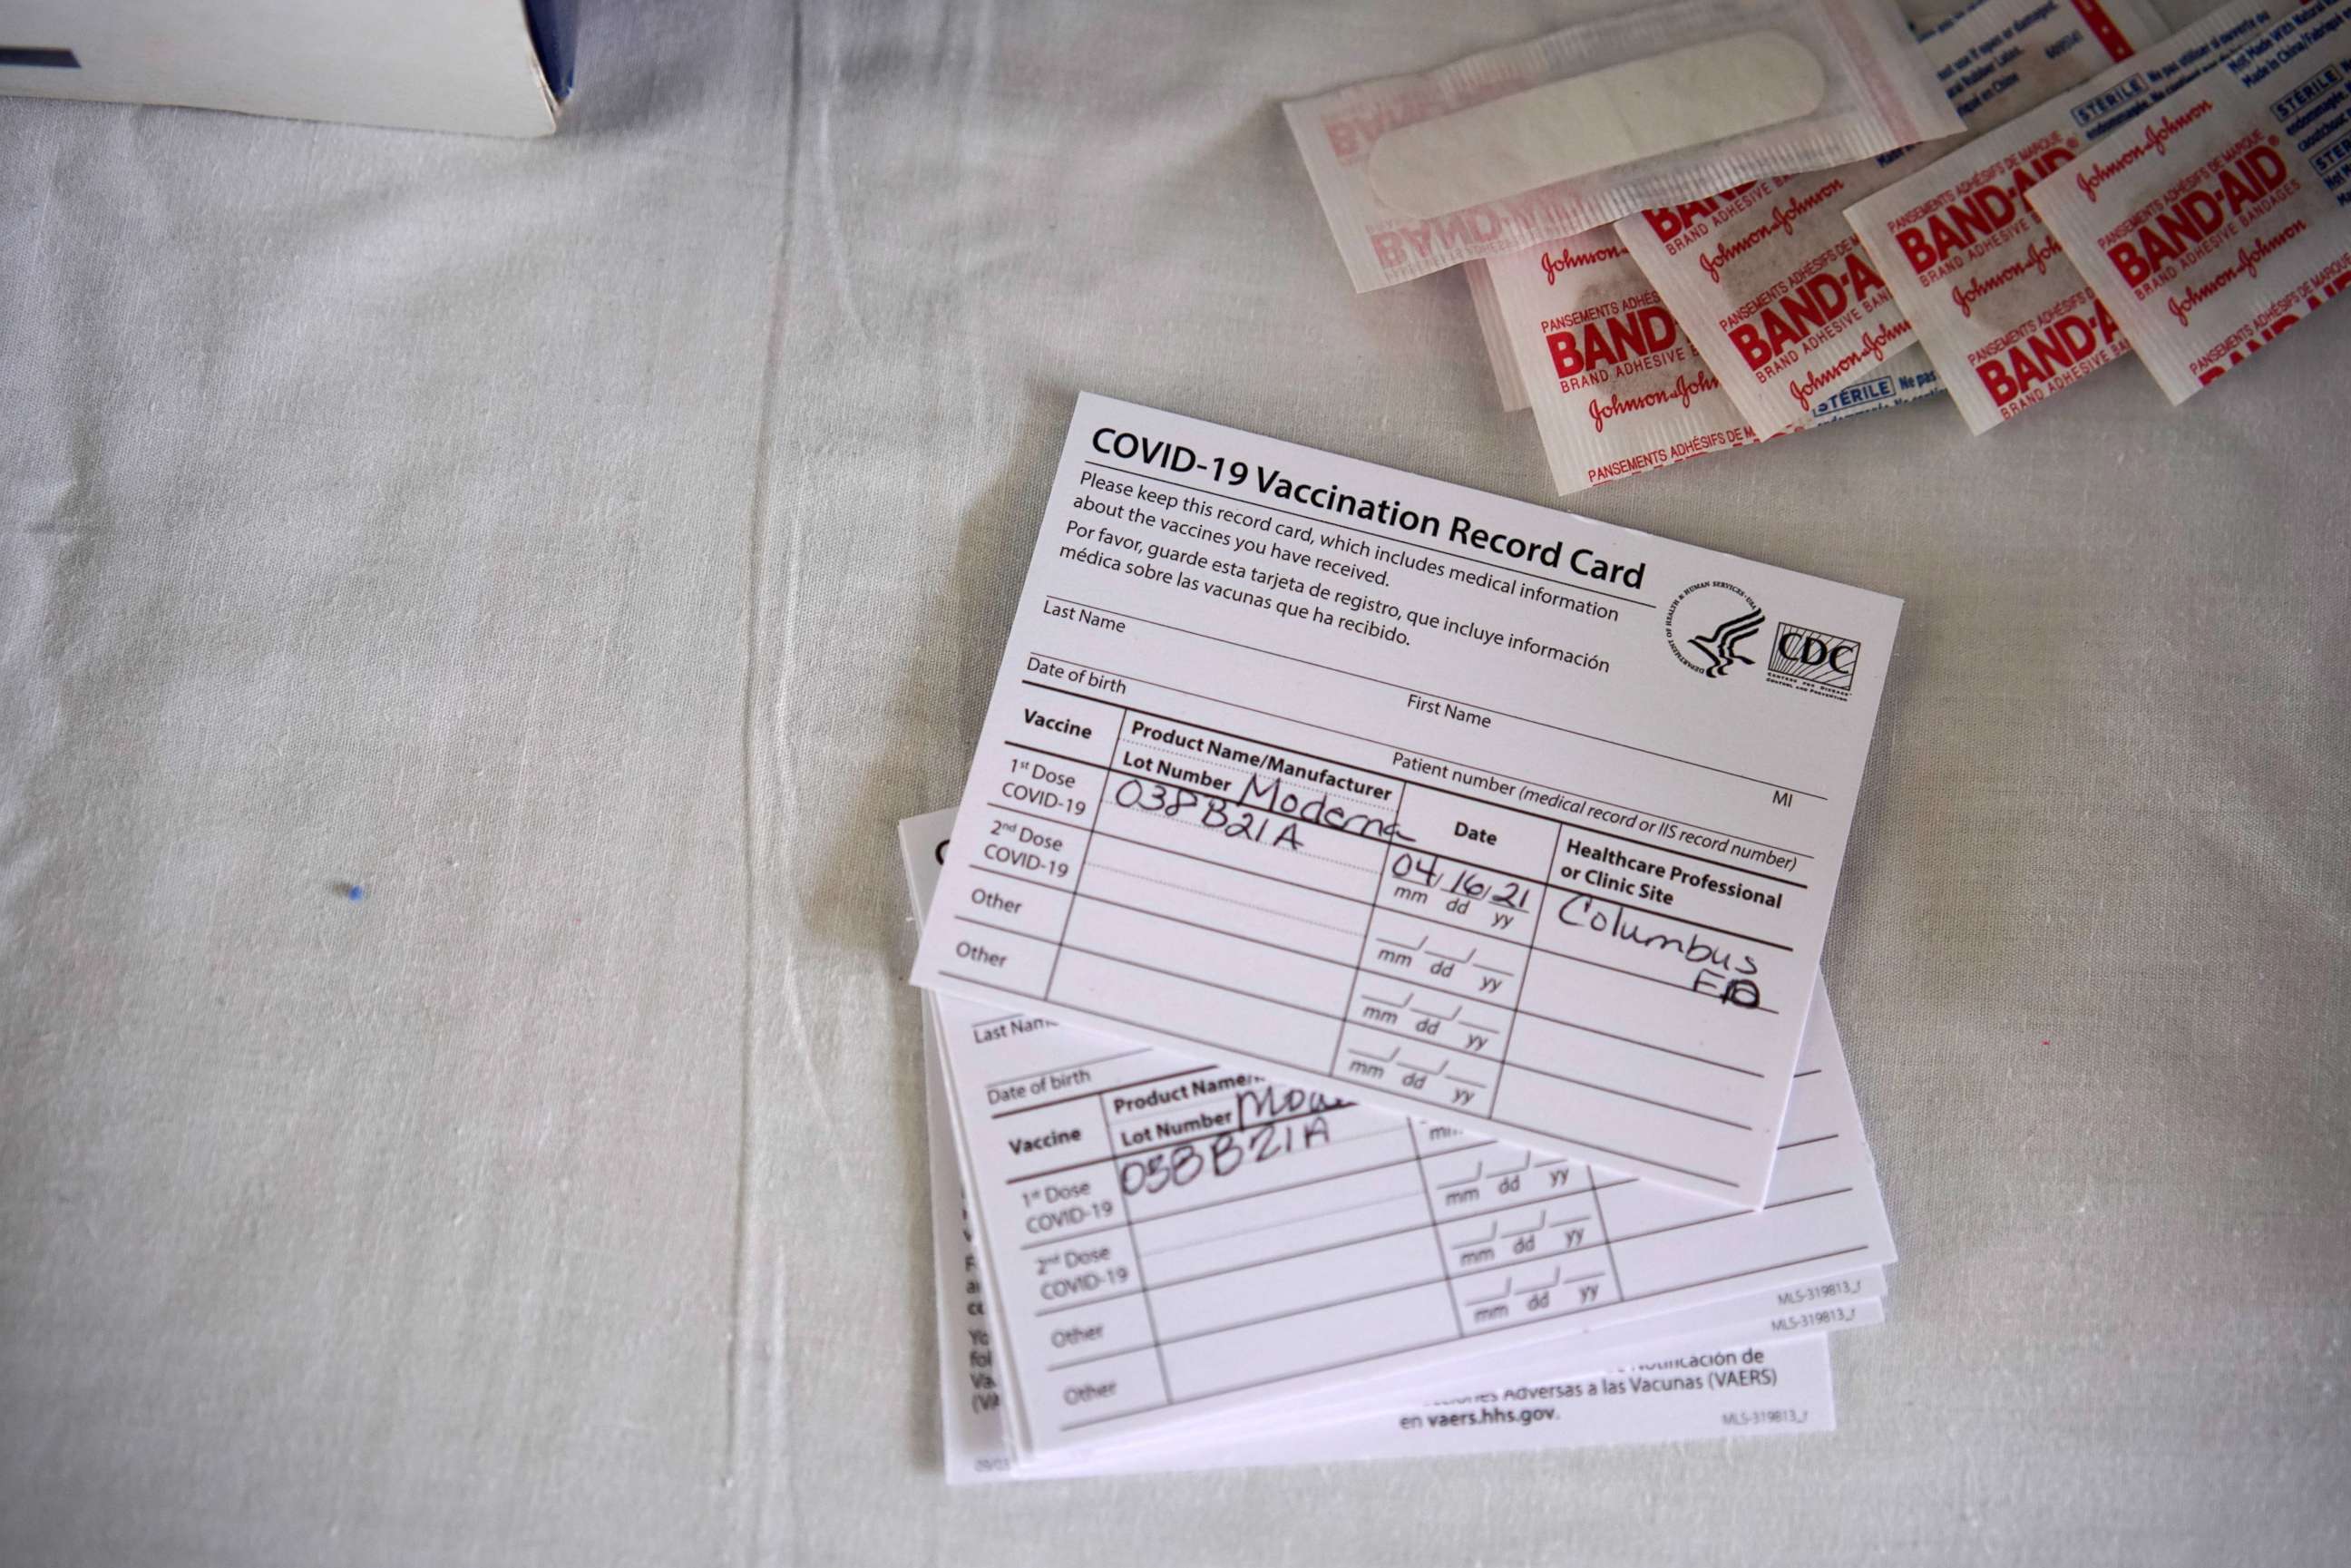 FILE PHOTO: Vaccination cards are pictured at a rural coronavirus disease (COVID-19) vaccination site in Columbus, New Mexico, U.S., April 16, 2021.  REUTERS/Paul Ratje/File Photo